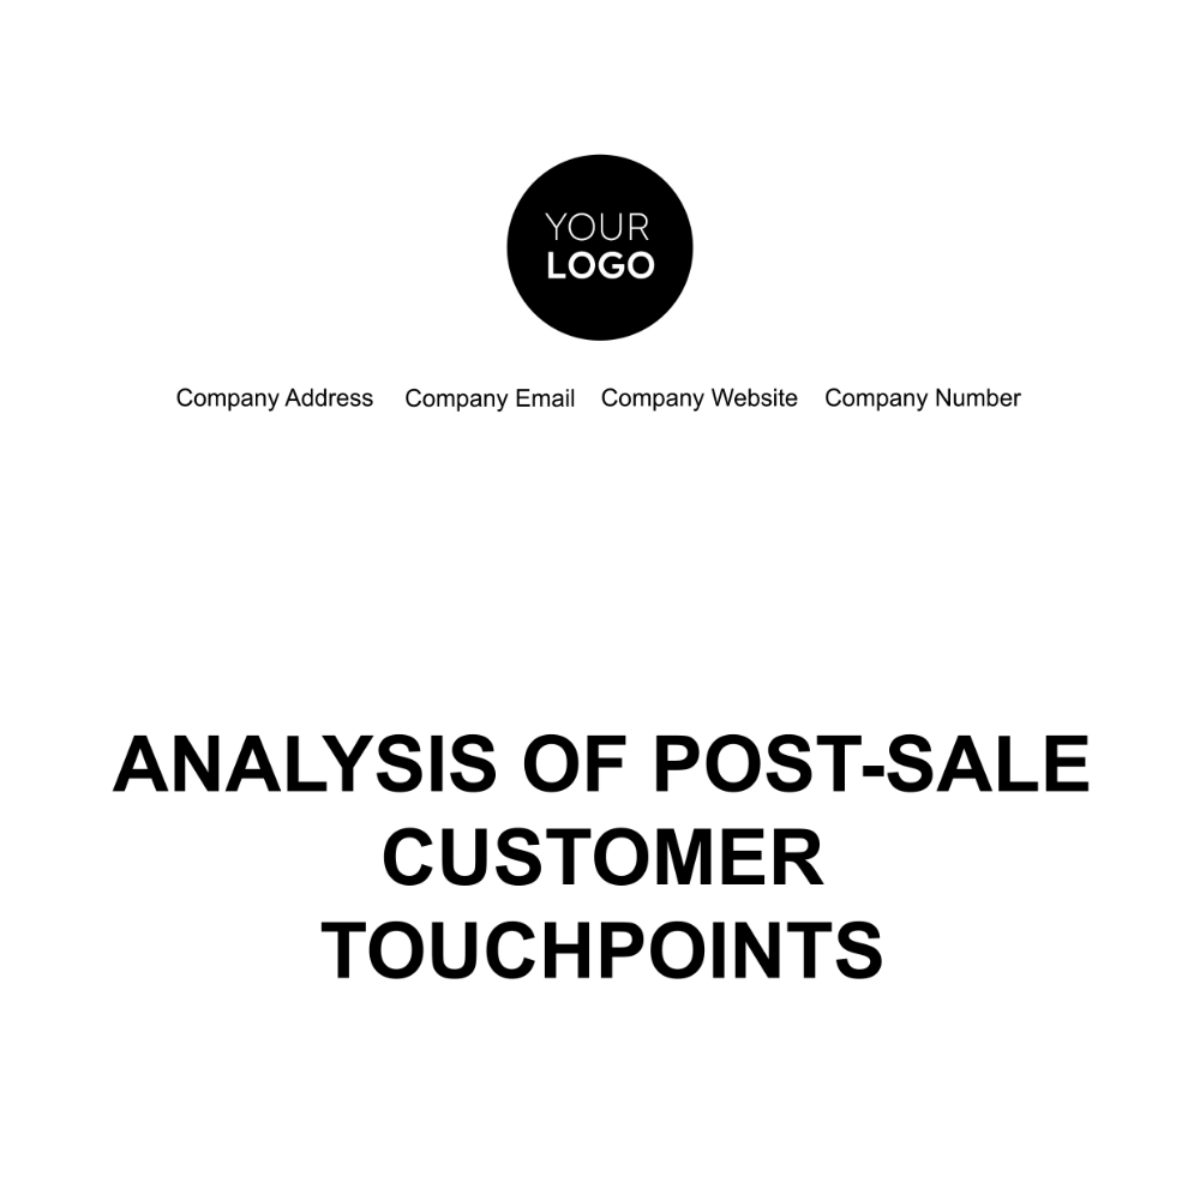 Analysis of Post-Sale Customer Touchpoints Template